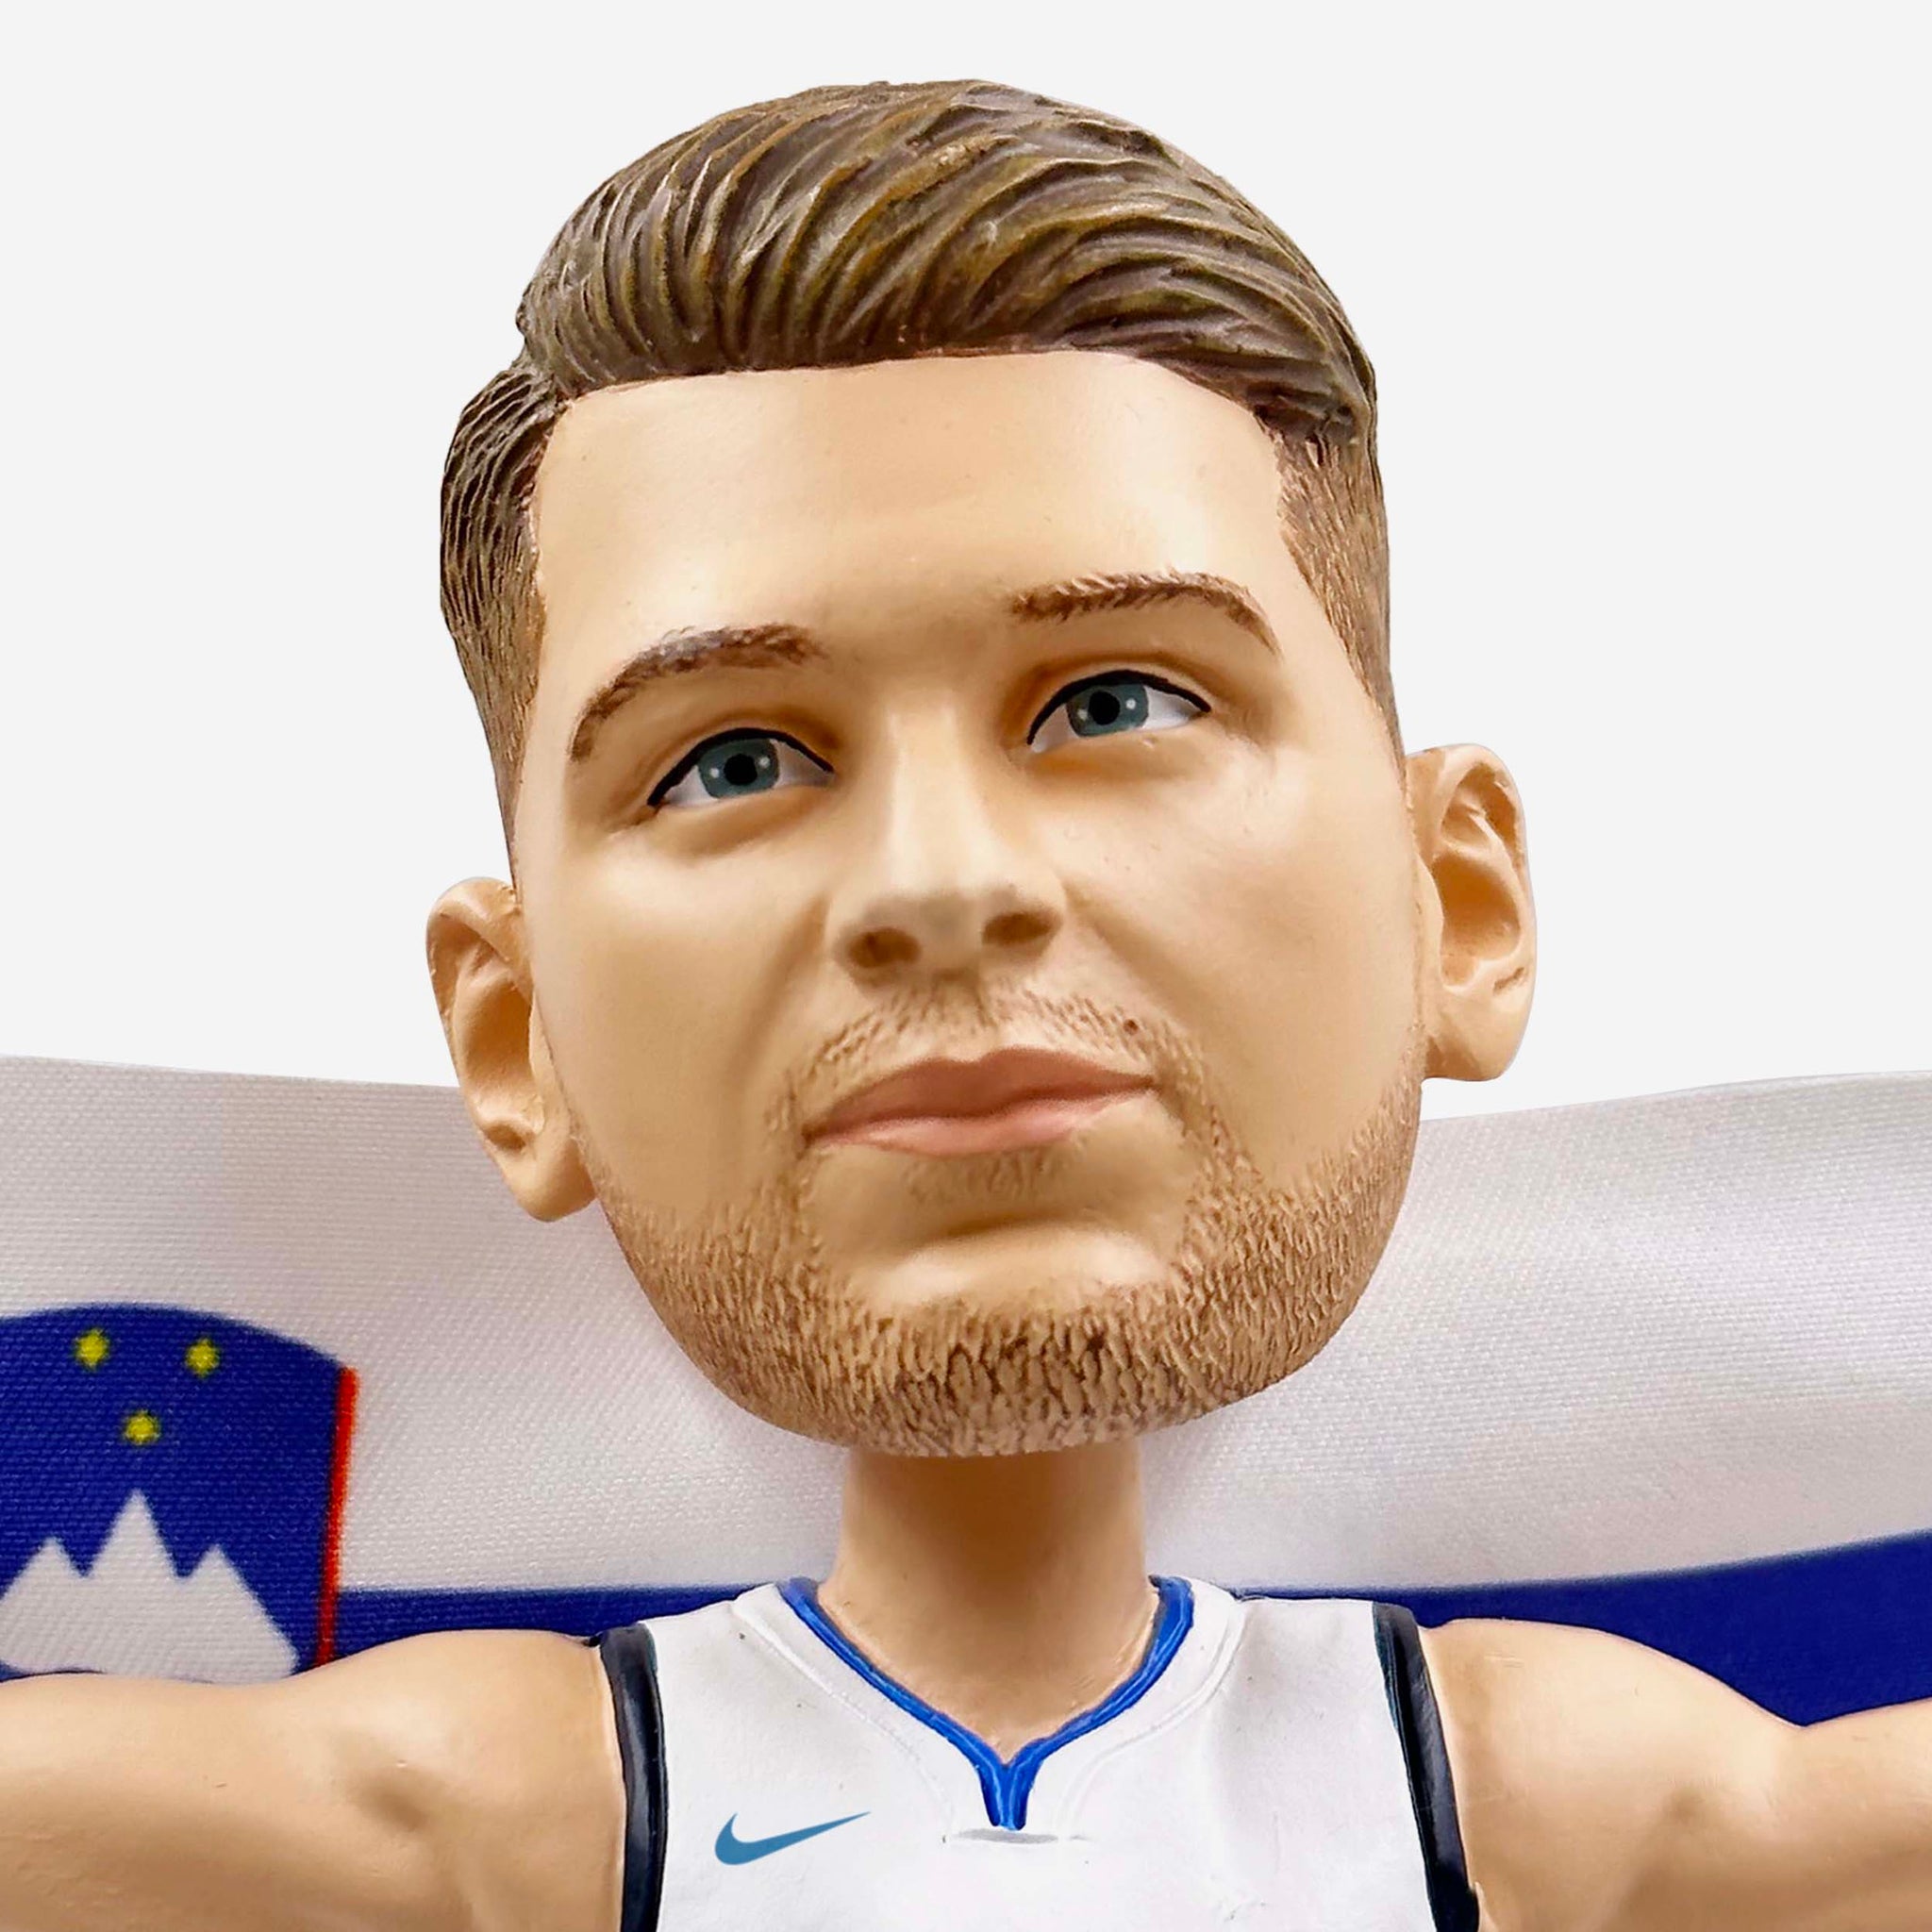 Mavs star Luka Doncic's Slovenia jerseys up for pre-order